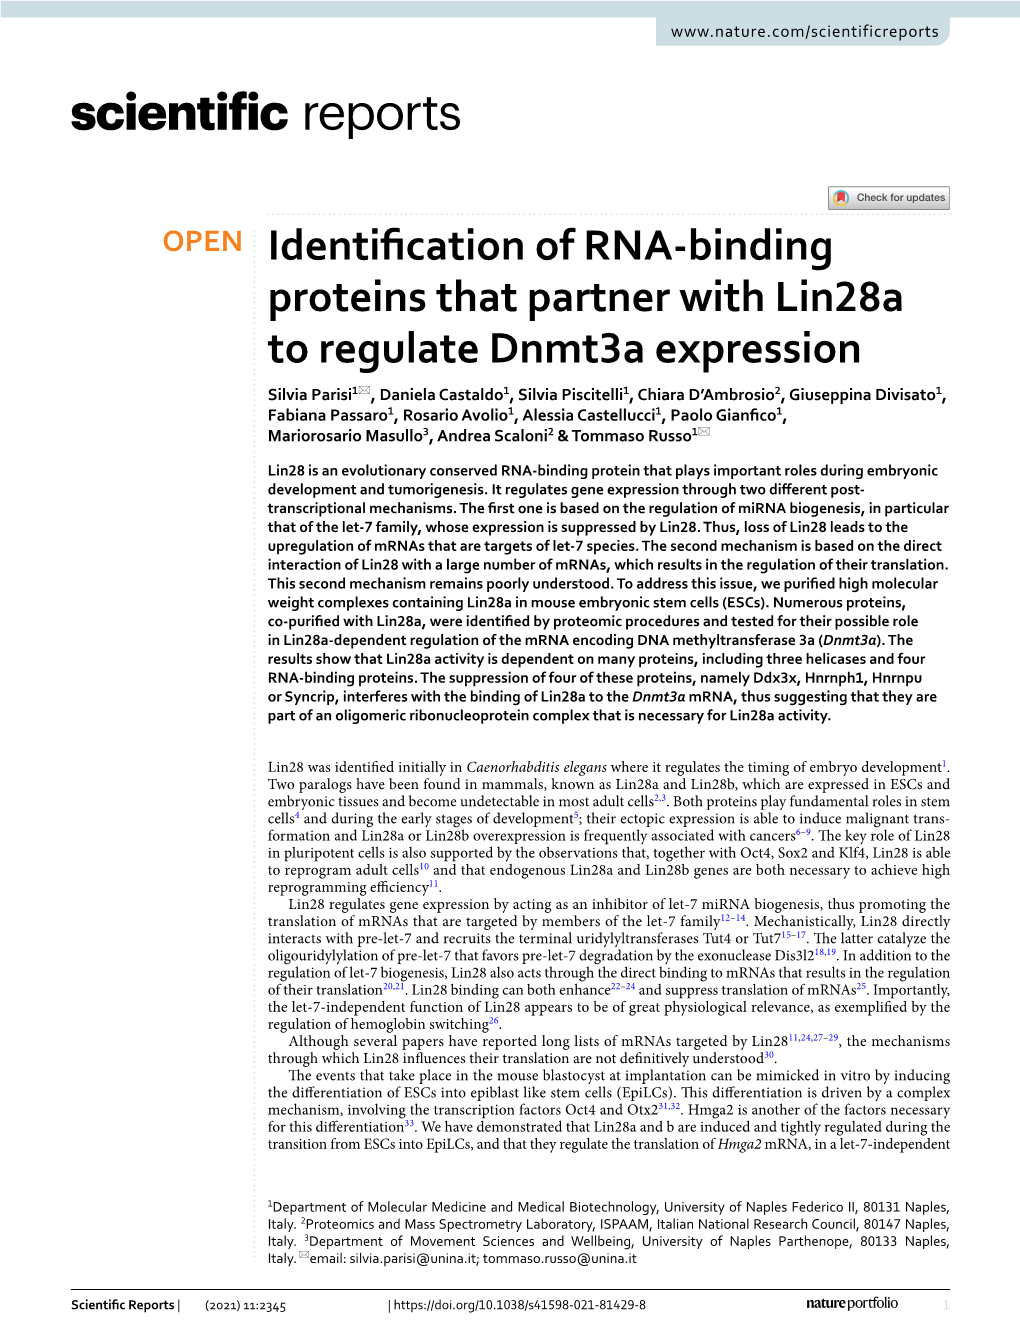 Identification of RNA-Binding Proteins That Partner with Lin28a to Regulate